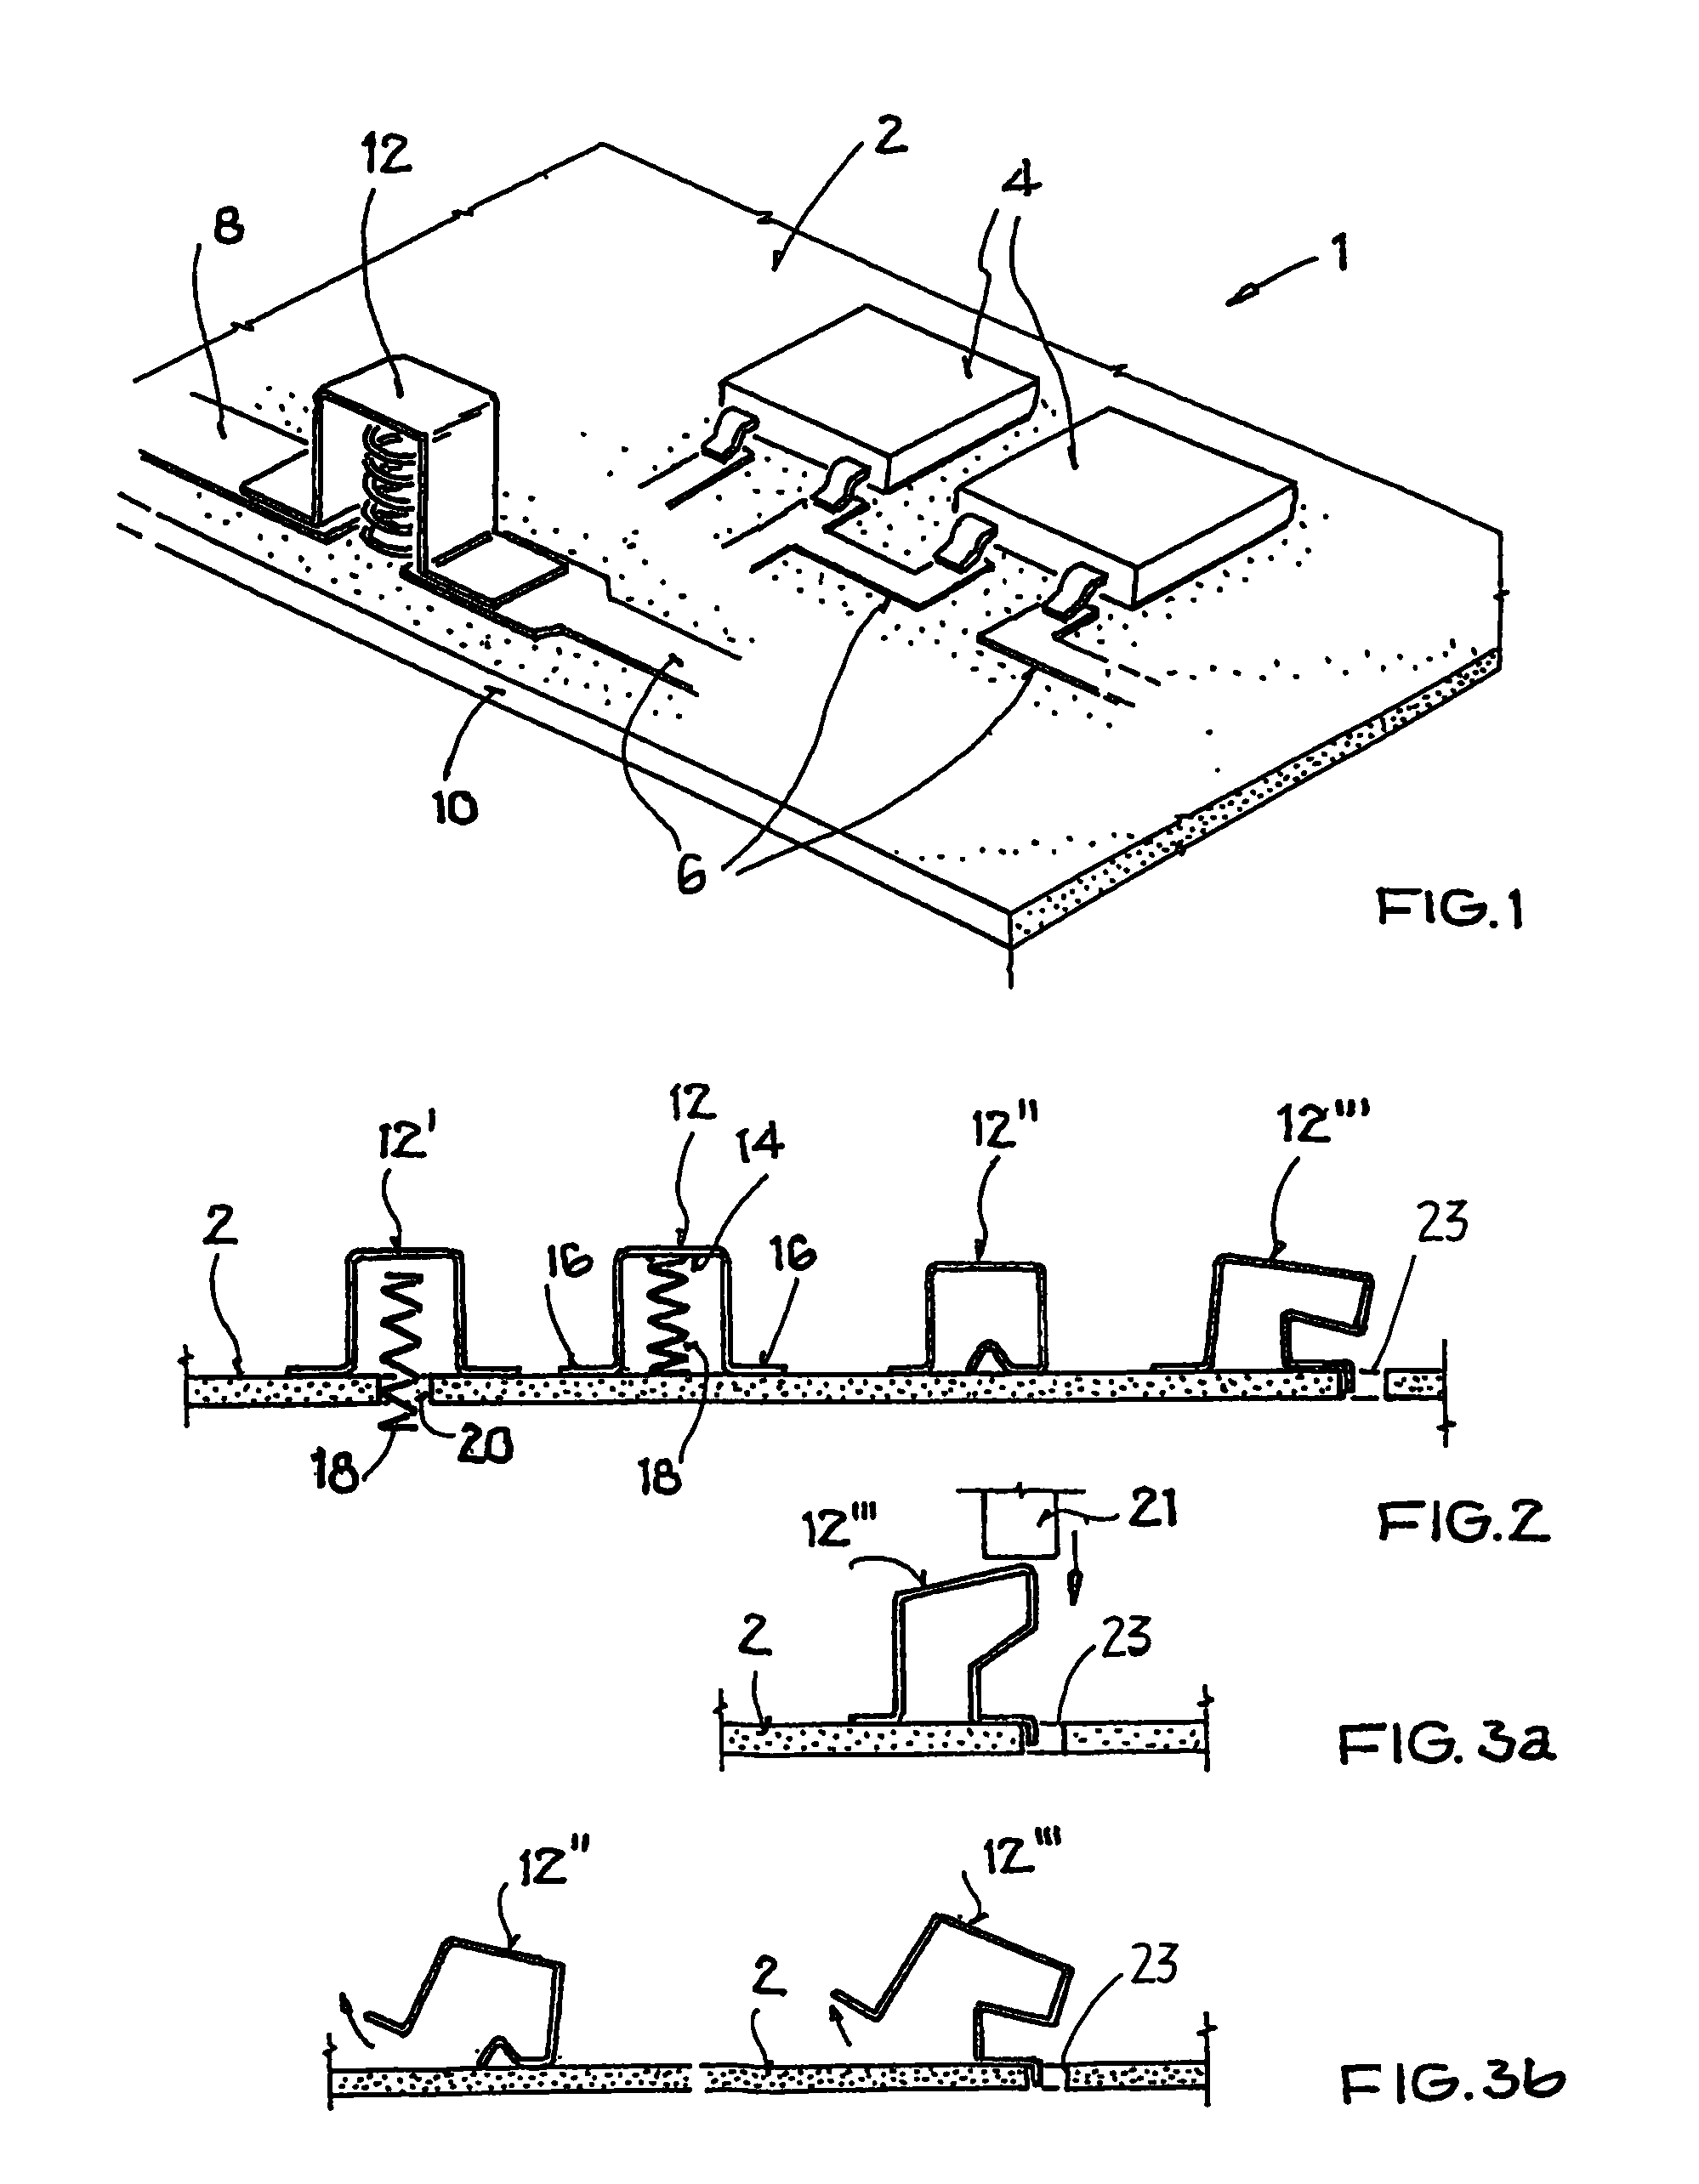 Electronic assembly having stressable contact bridge with fuse function